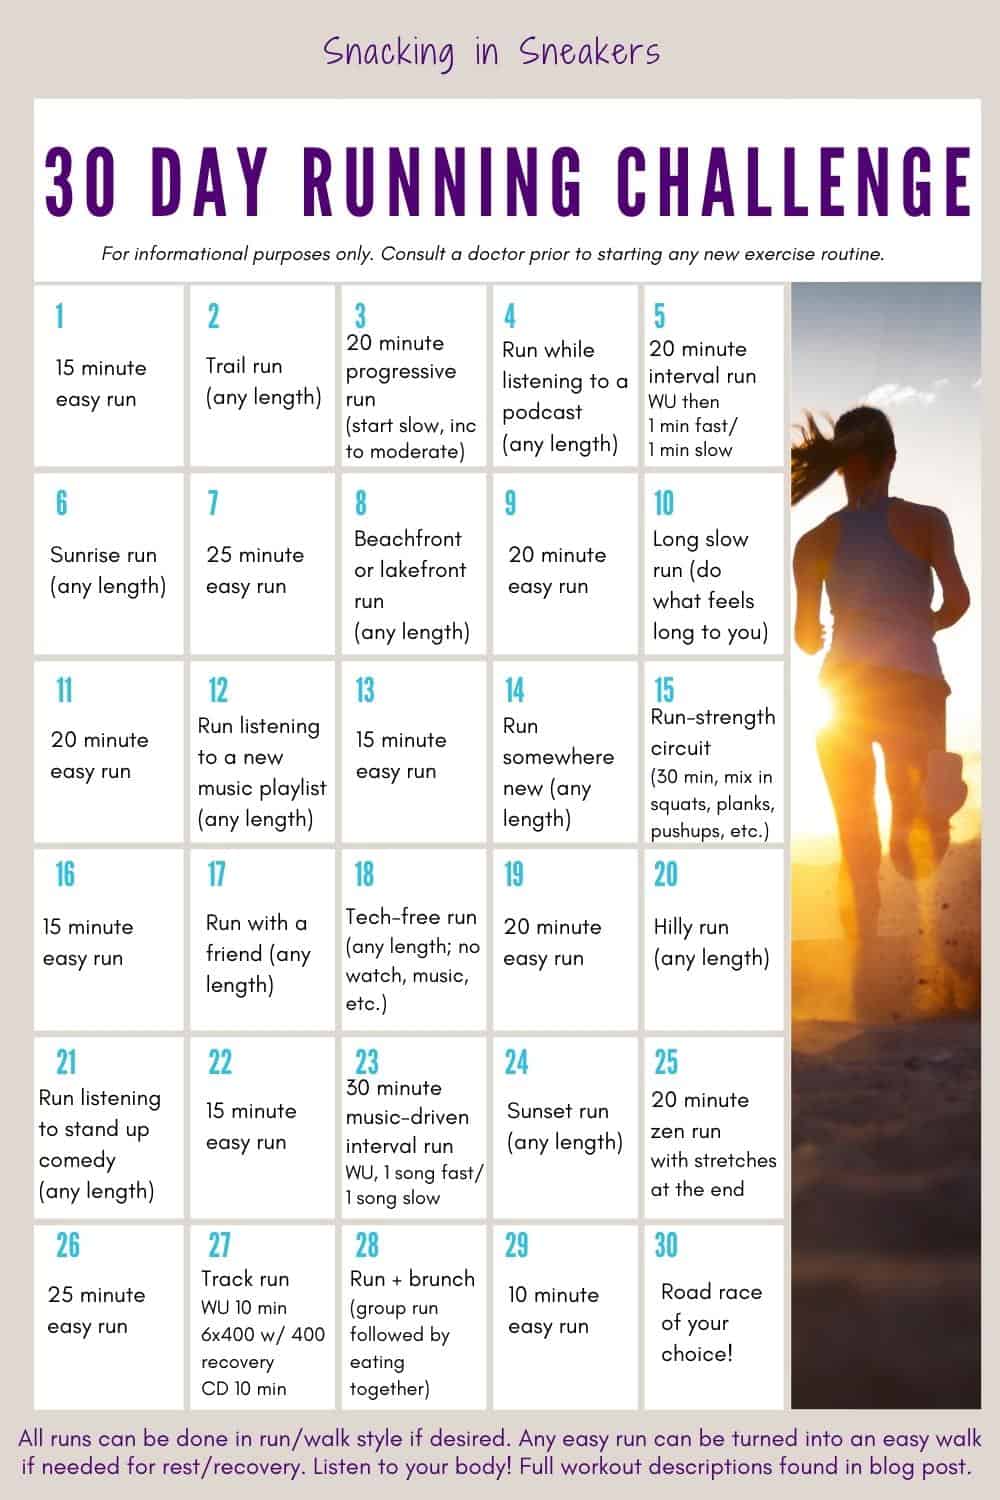 30 Day Running Challenge to Get You Motivated! Snacking in Sneakers